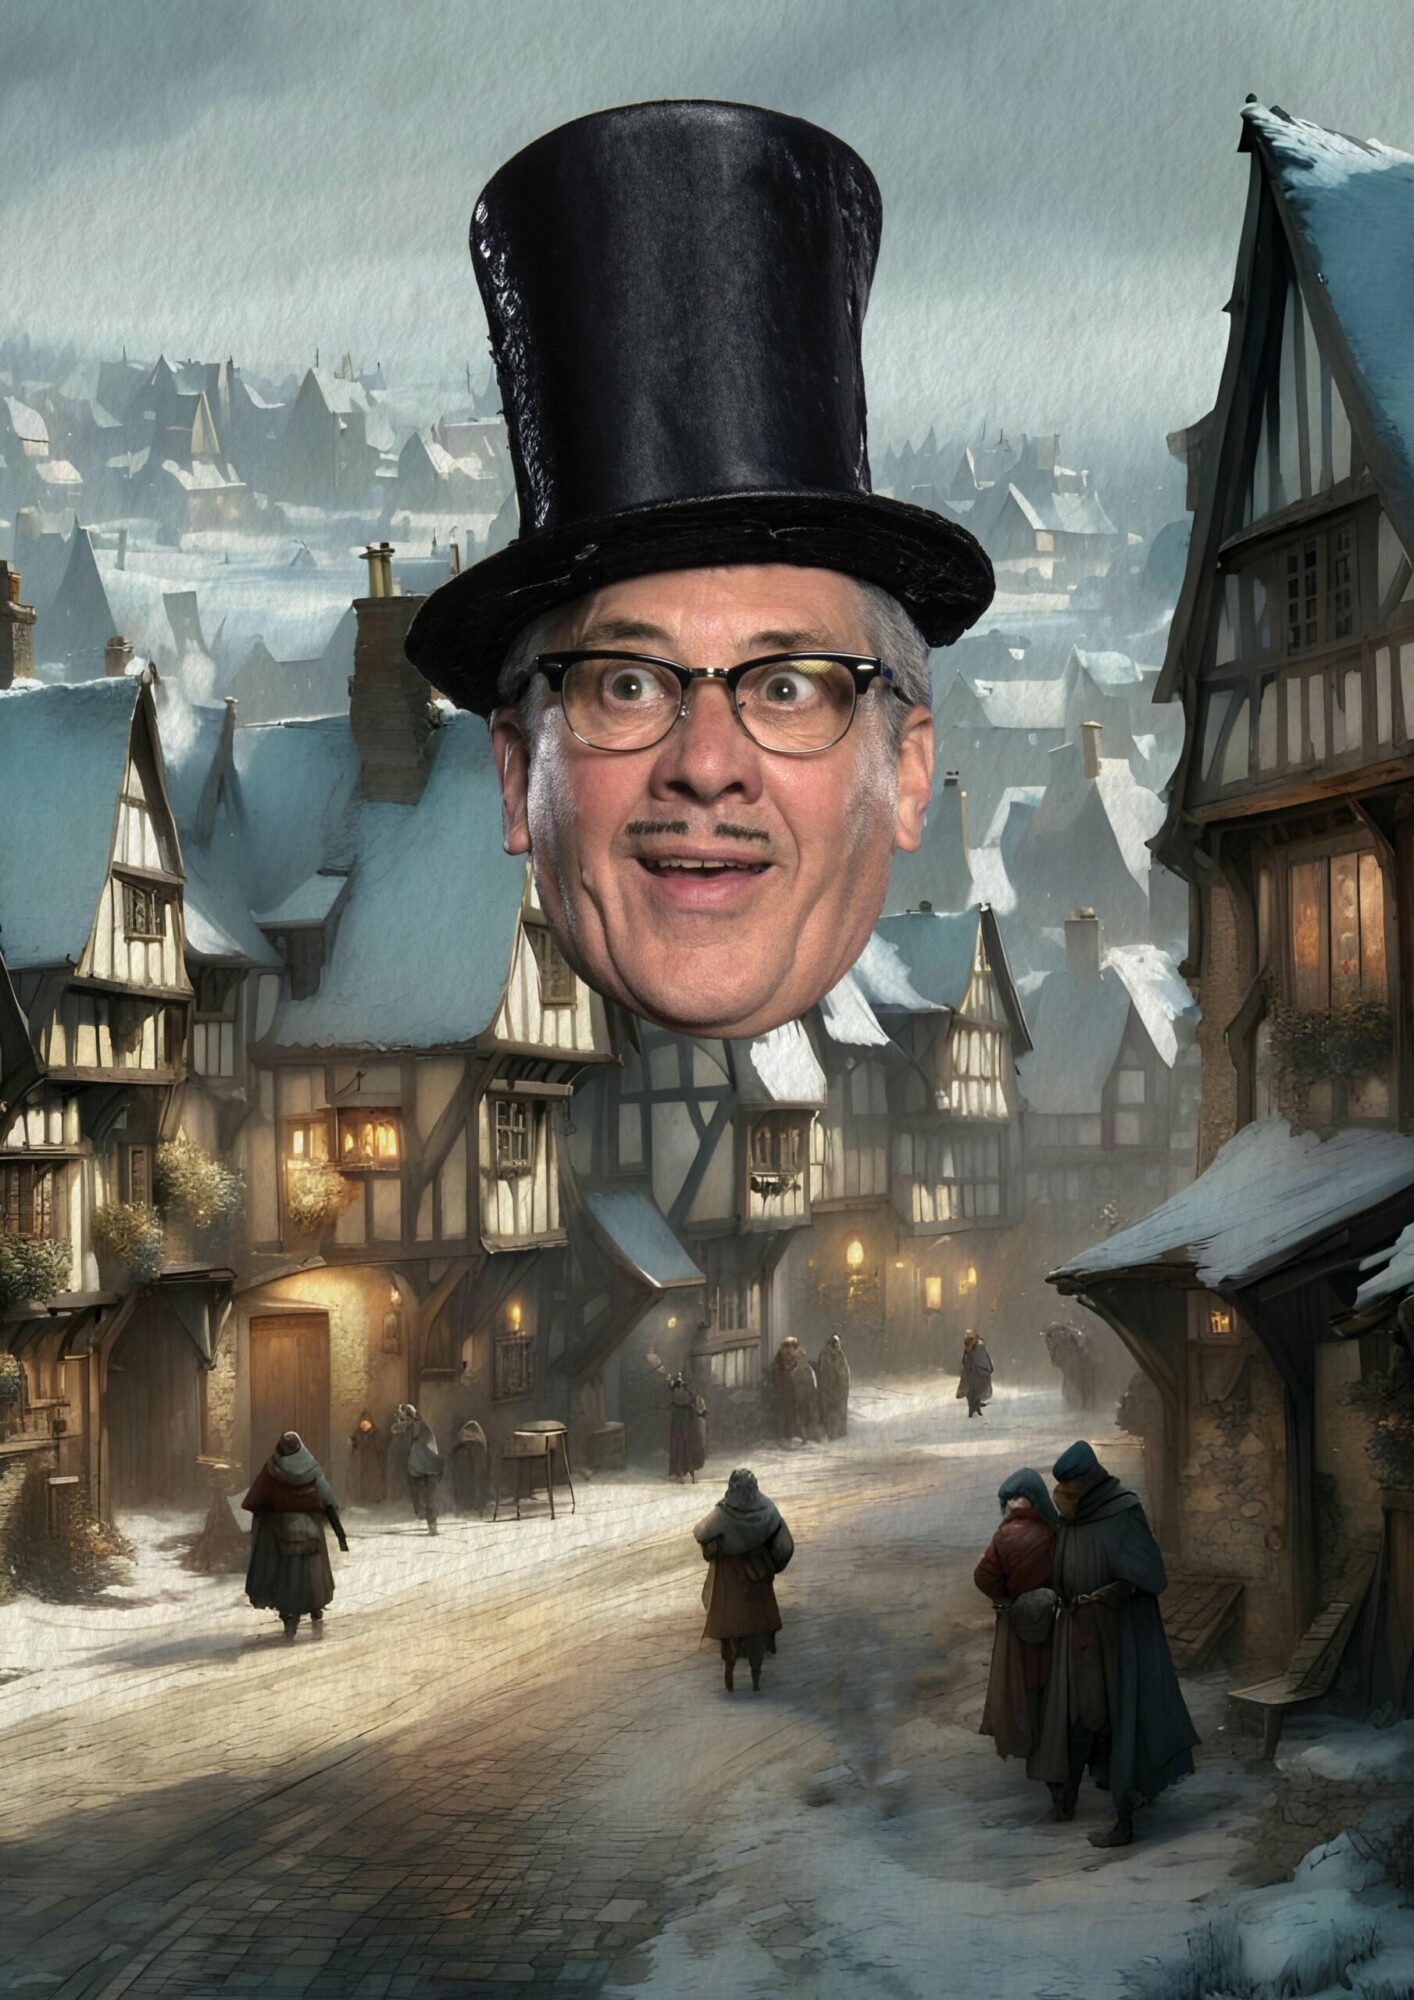 Image name Count Arthur Strong Is Charles Dickens In a Christmas Carol at The Forum Northallerton Northallerton scaled the 15 image from the post Events in Yorkshire.com.